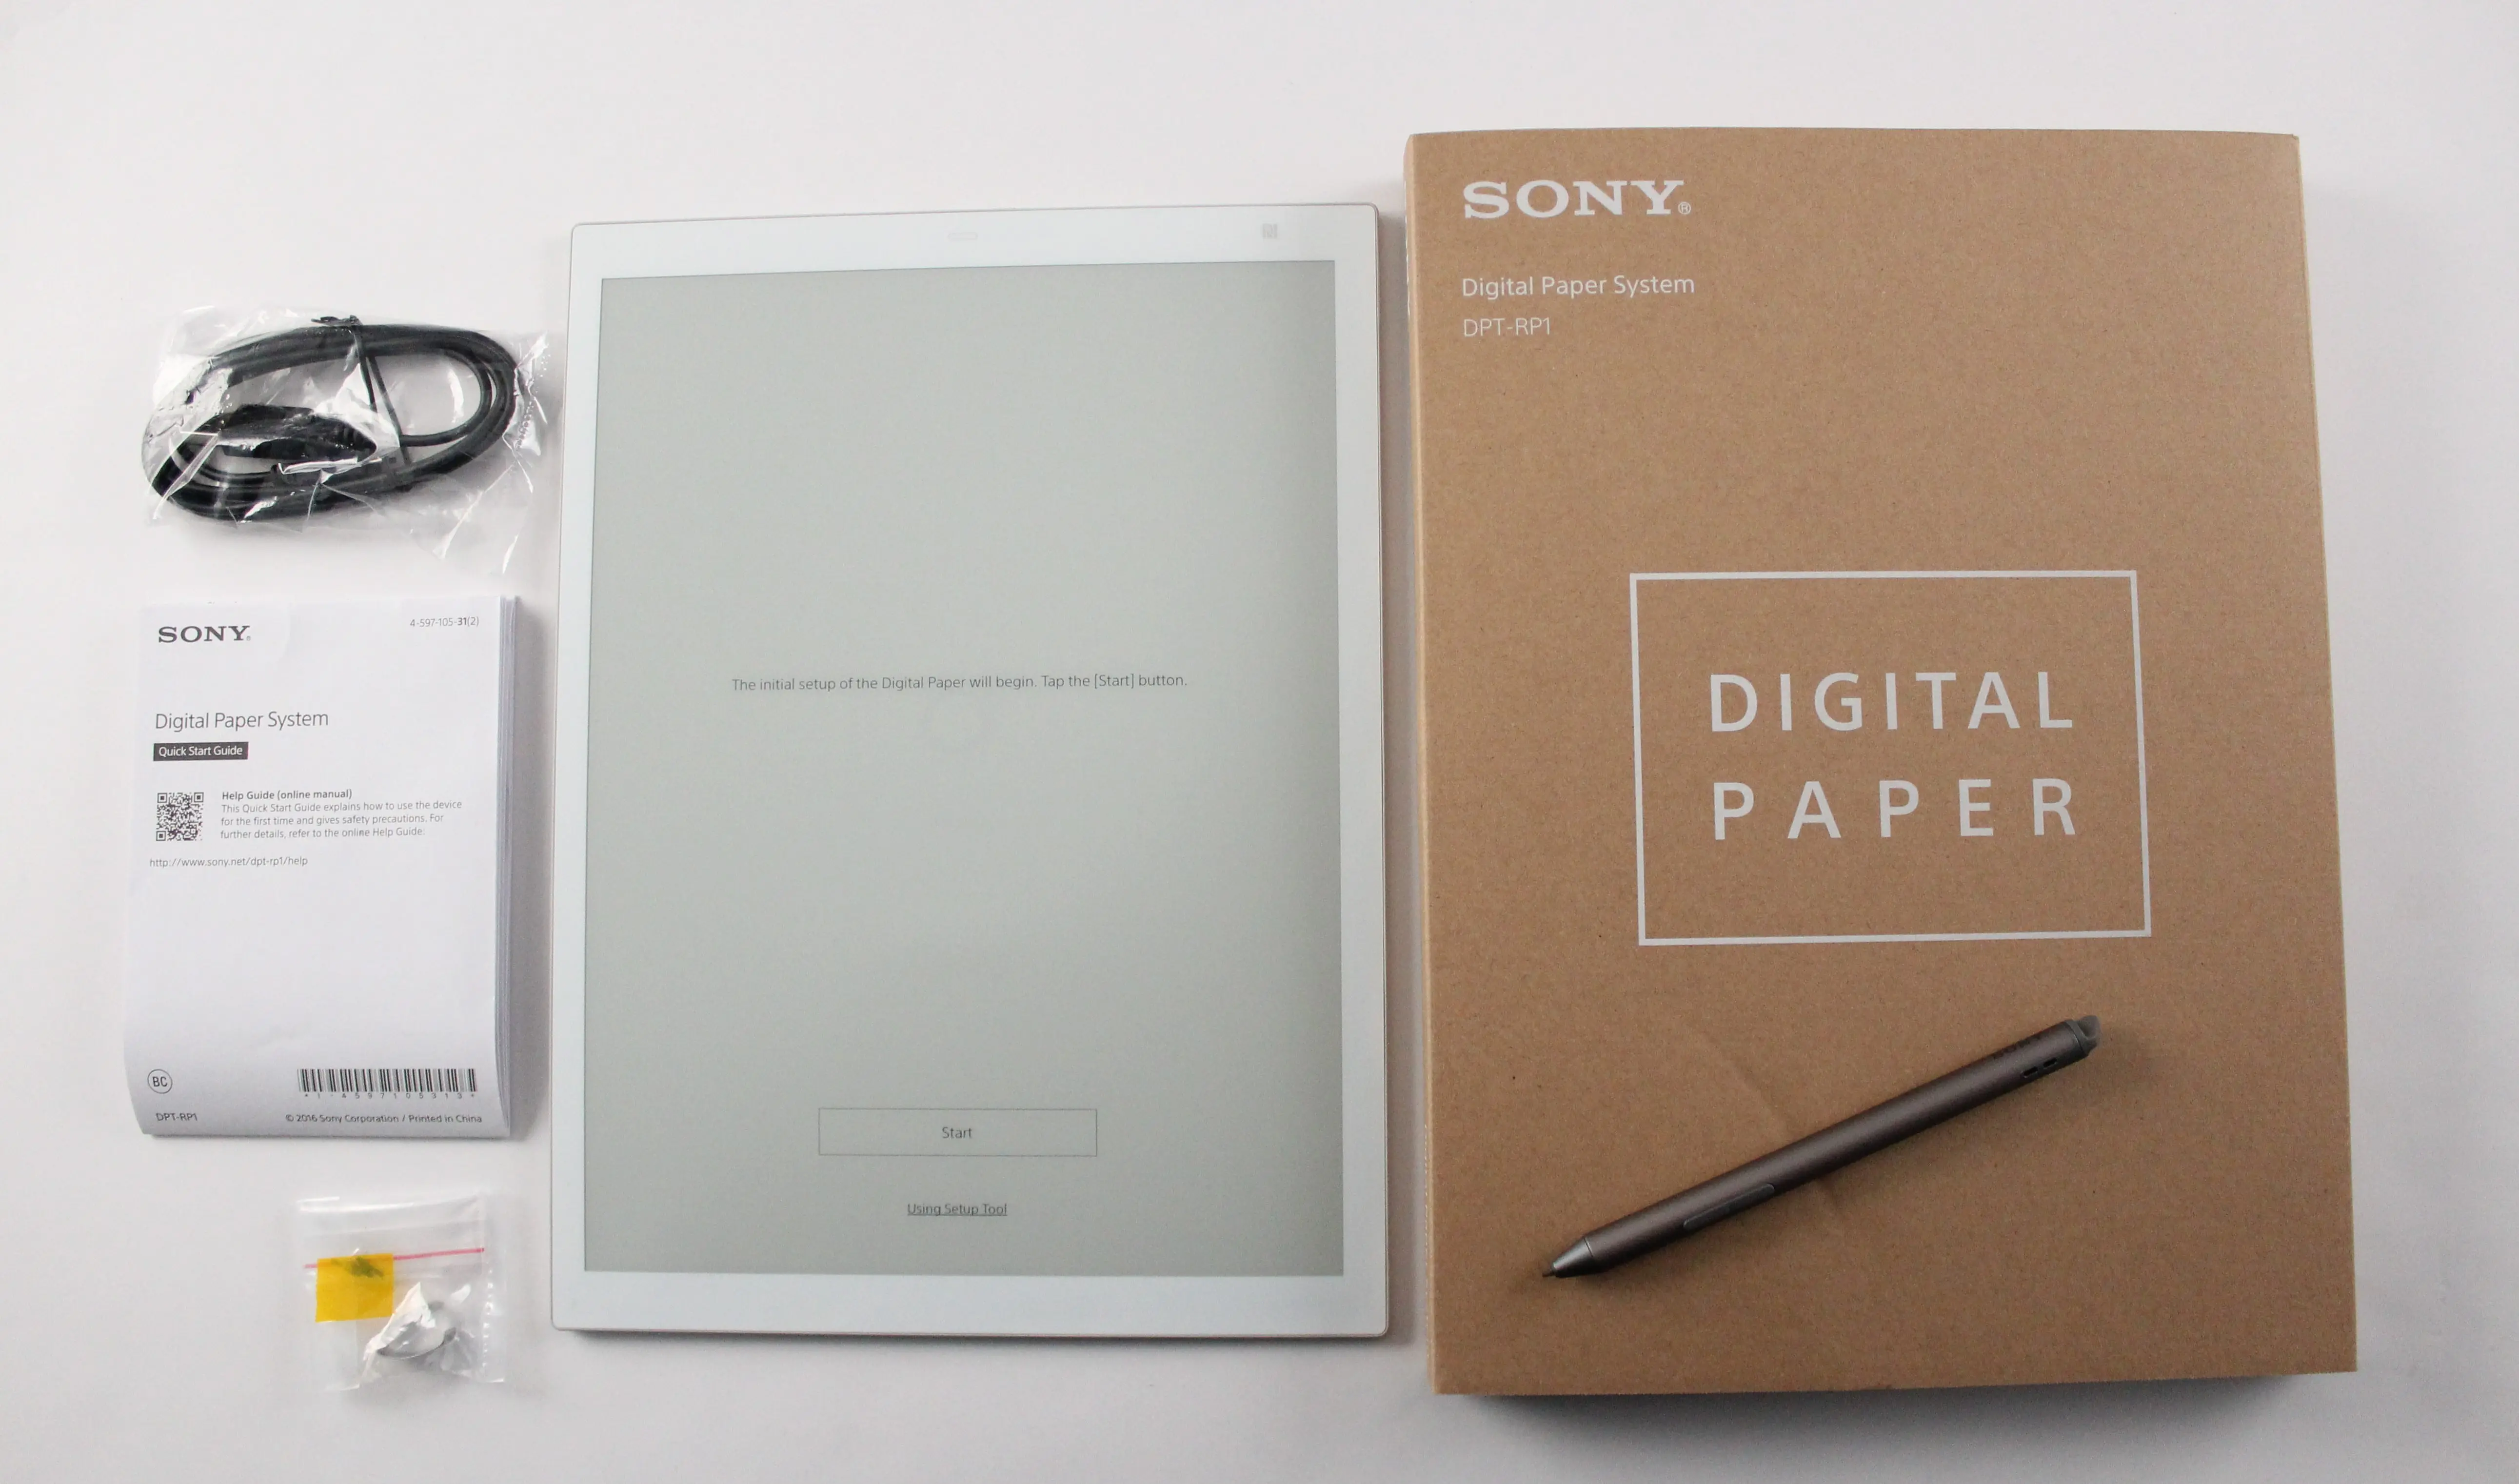 SONY Digital Paper System DPT-RP1 - タブレット